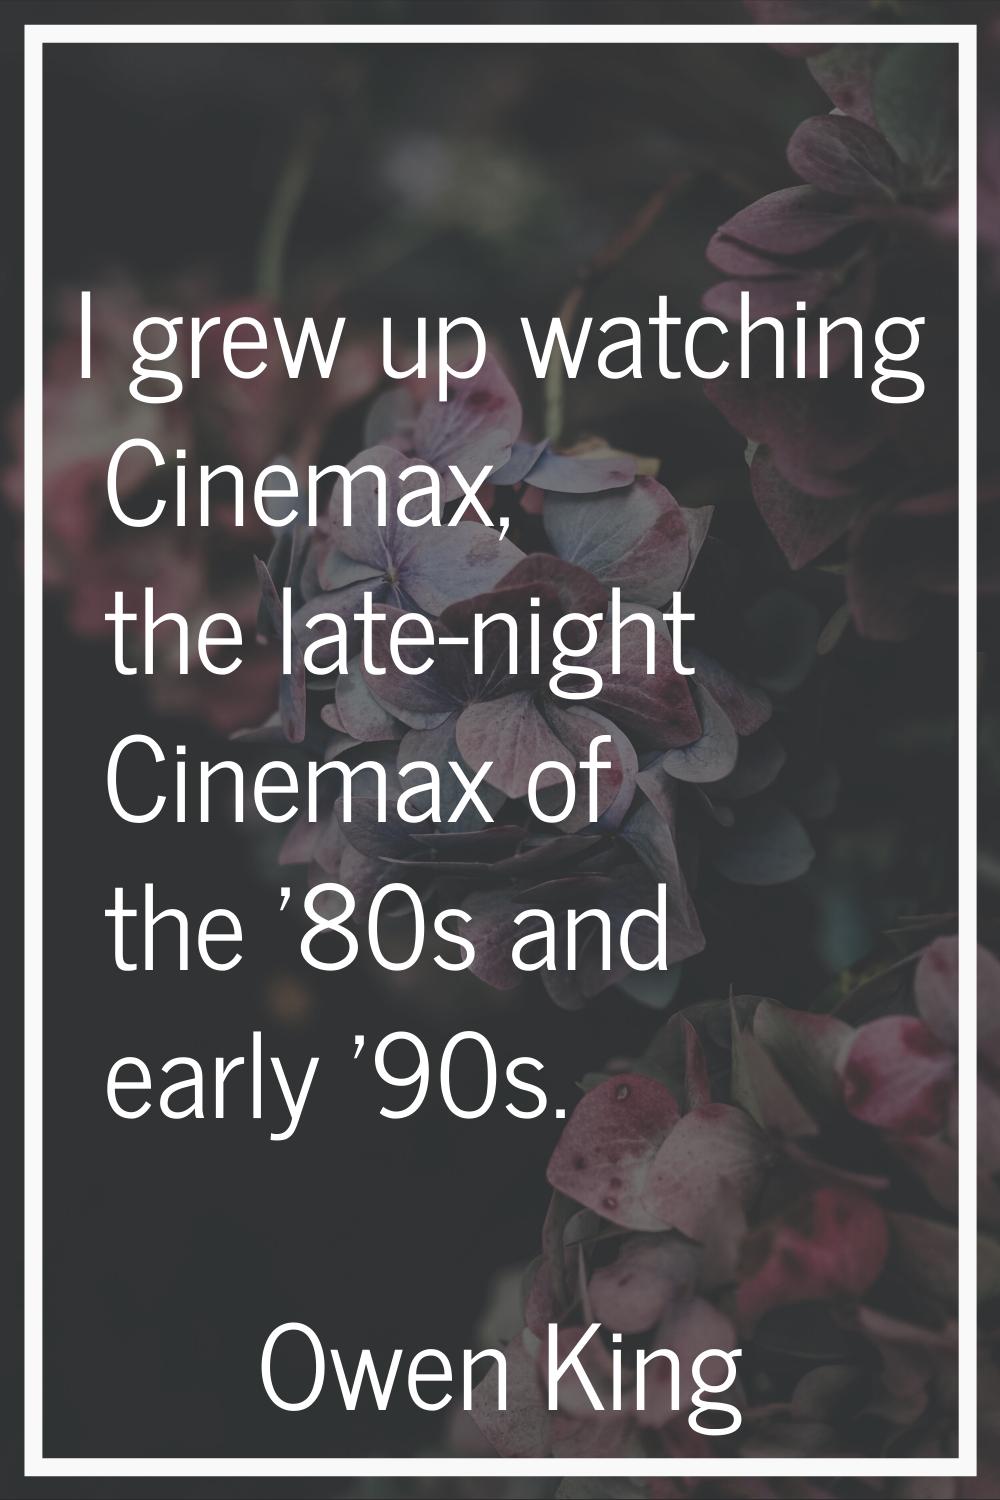 I grew up watching Cinemax, the late-night Cinemax of the '80s and early '90s.